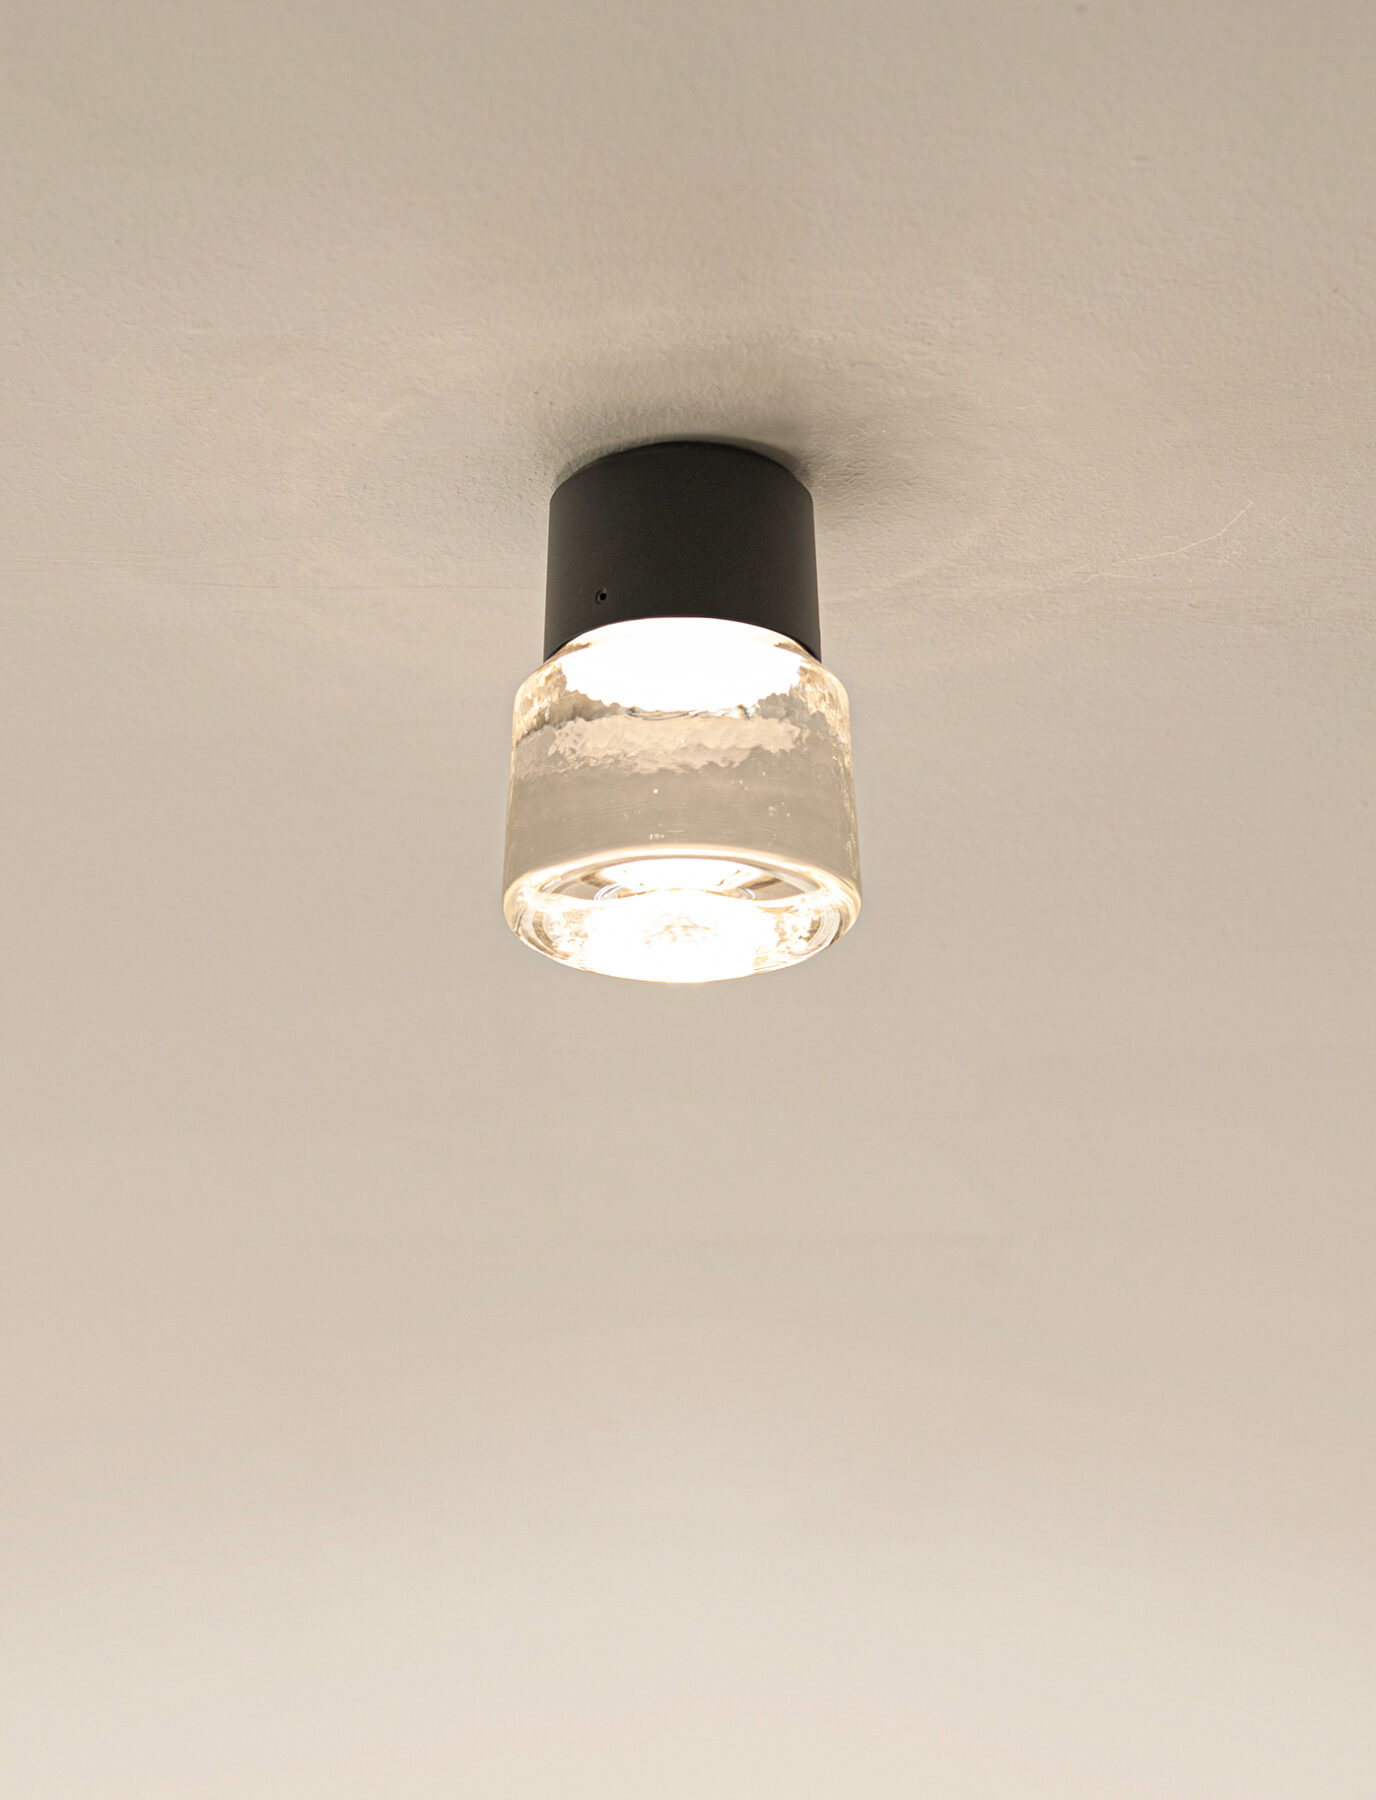 Cast LED ceiling light made of cast glass and black anodised aluminium.